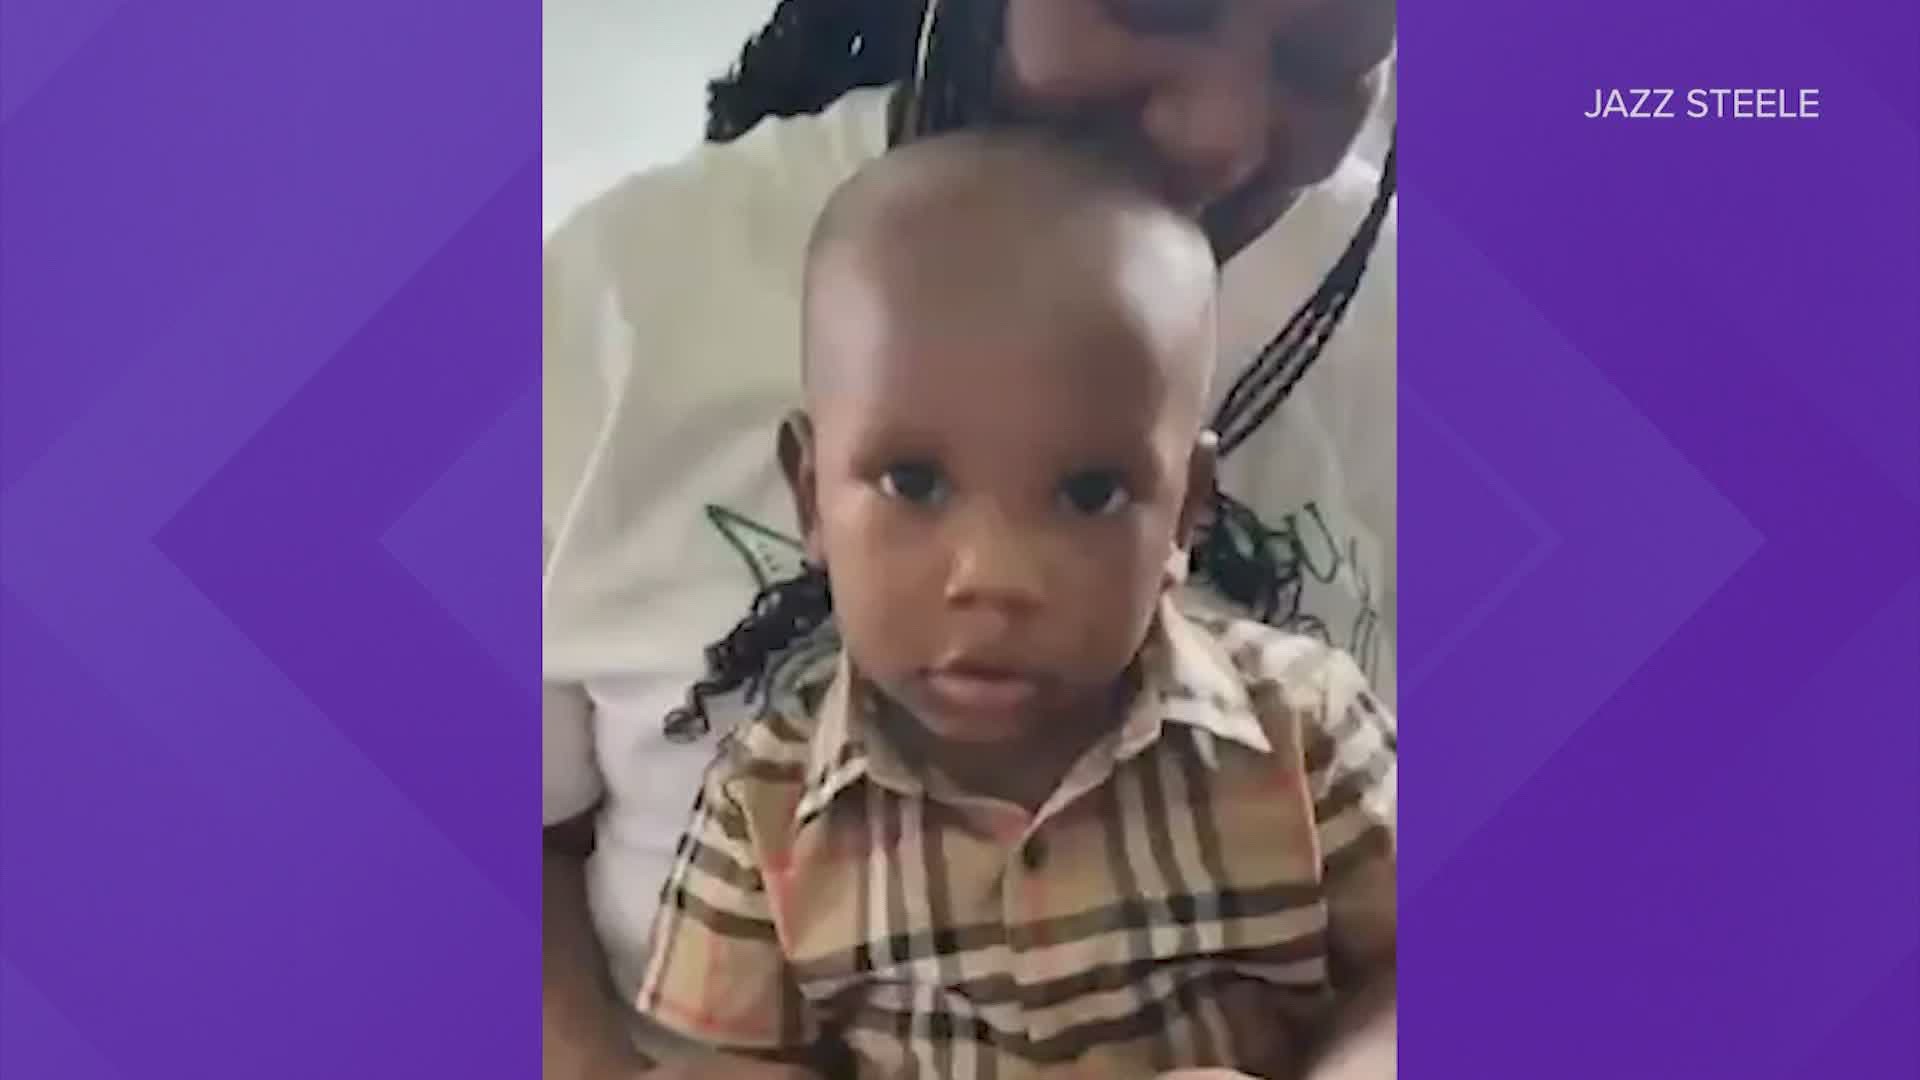 Family members tried to put on brave faces at a weekend birthday party for a 1-year-old boy, but it was tough days just after his mother was murdered.